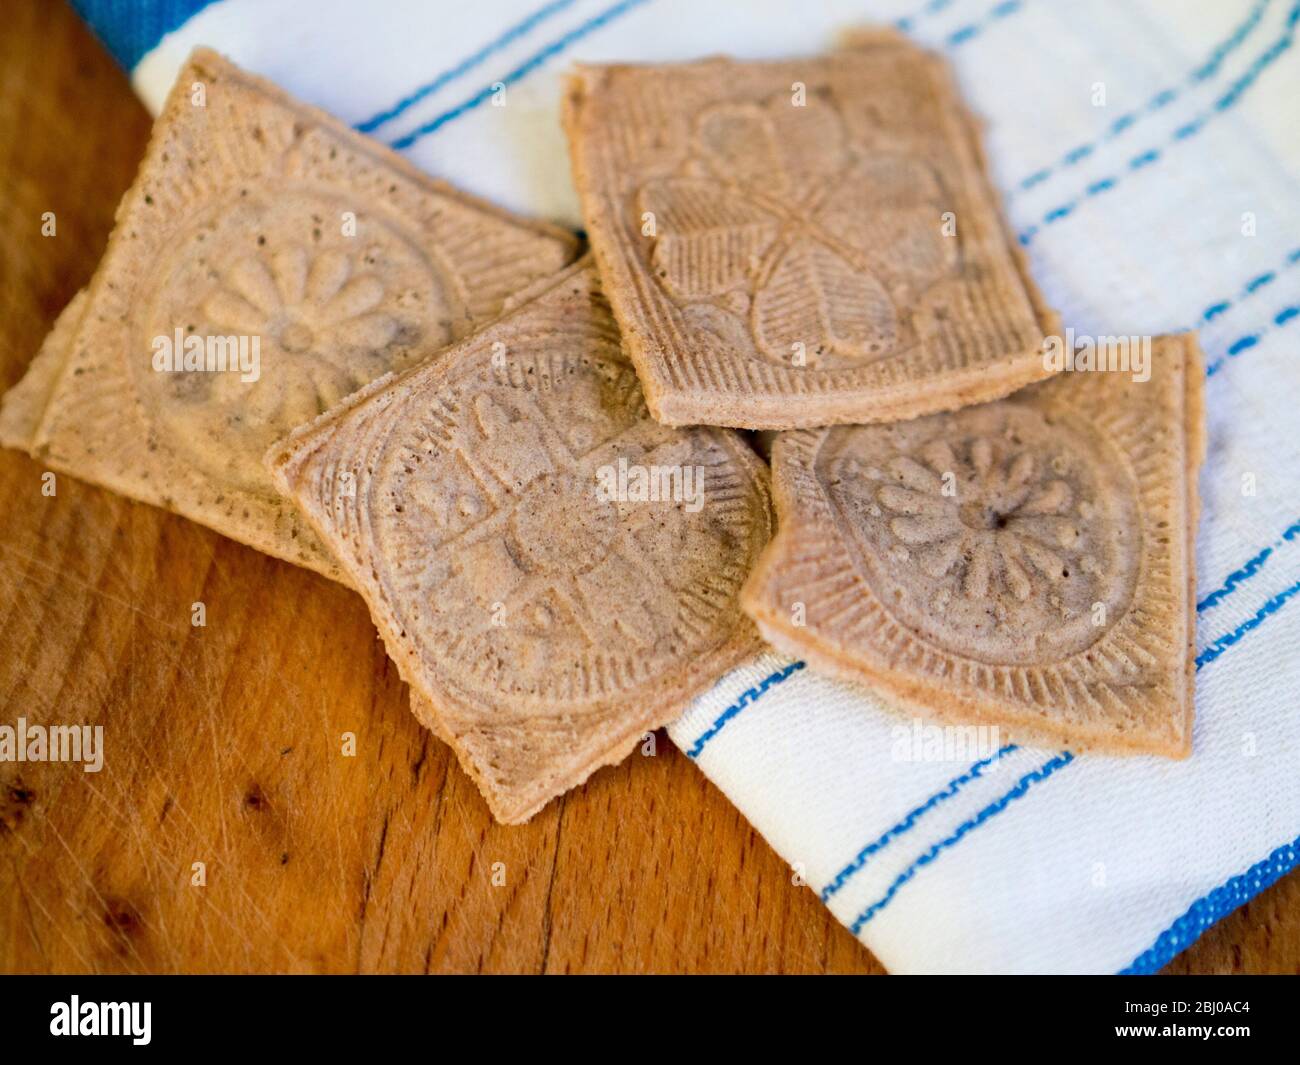 Home made buckwheat crackers, cooked in a German waffle iron. Stock Photo